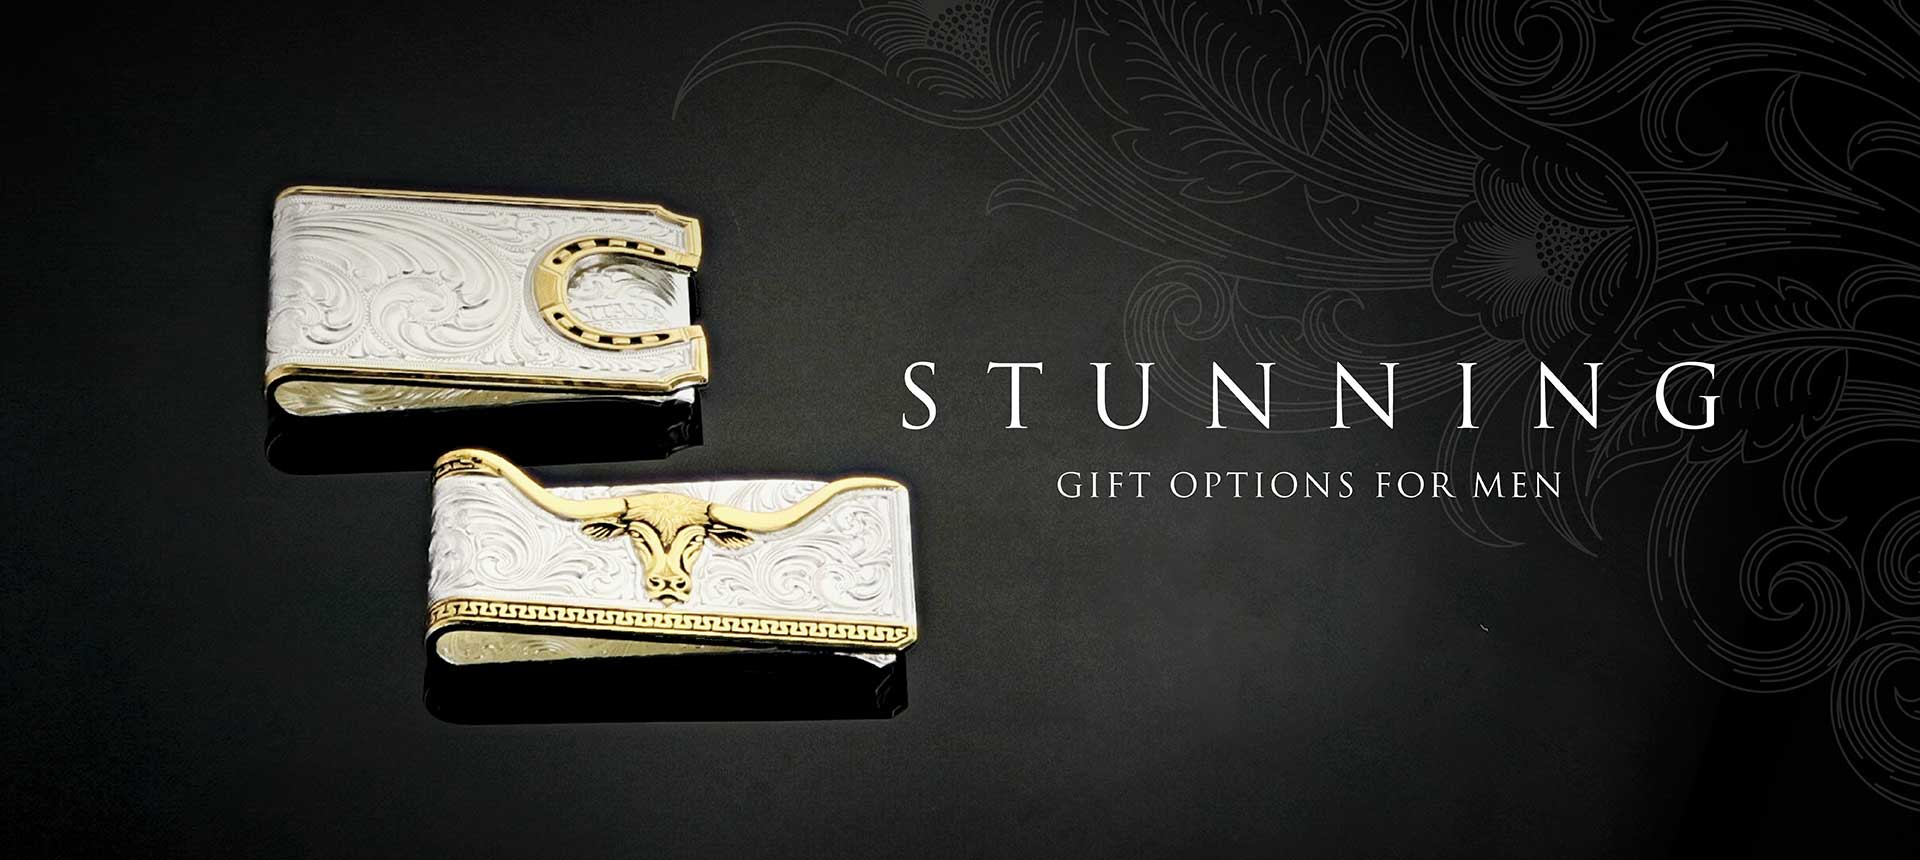 Dad's Gift Guide| Men's Jewelry and Buckles | Montana Silversmiths